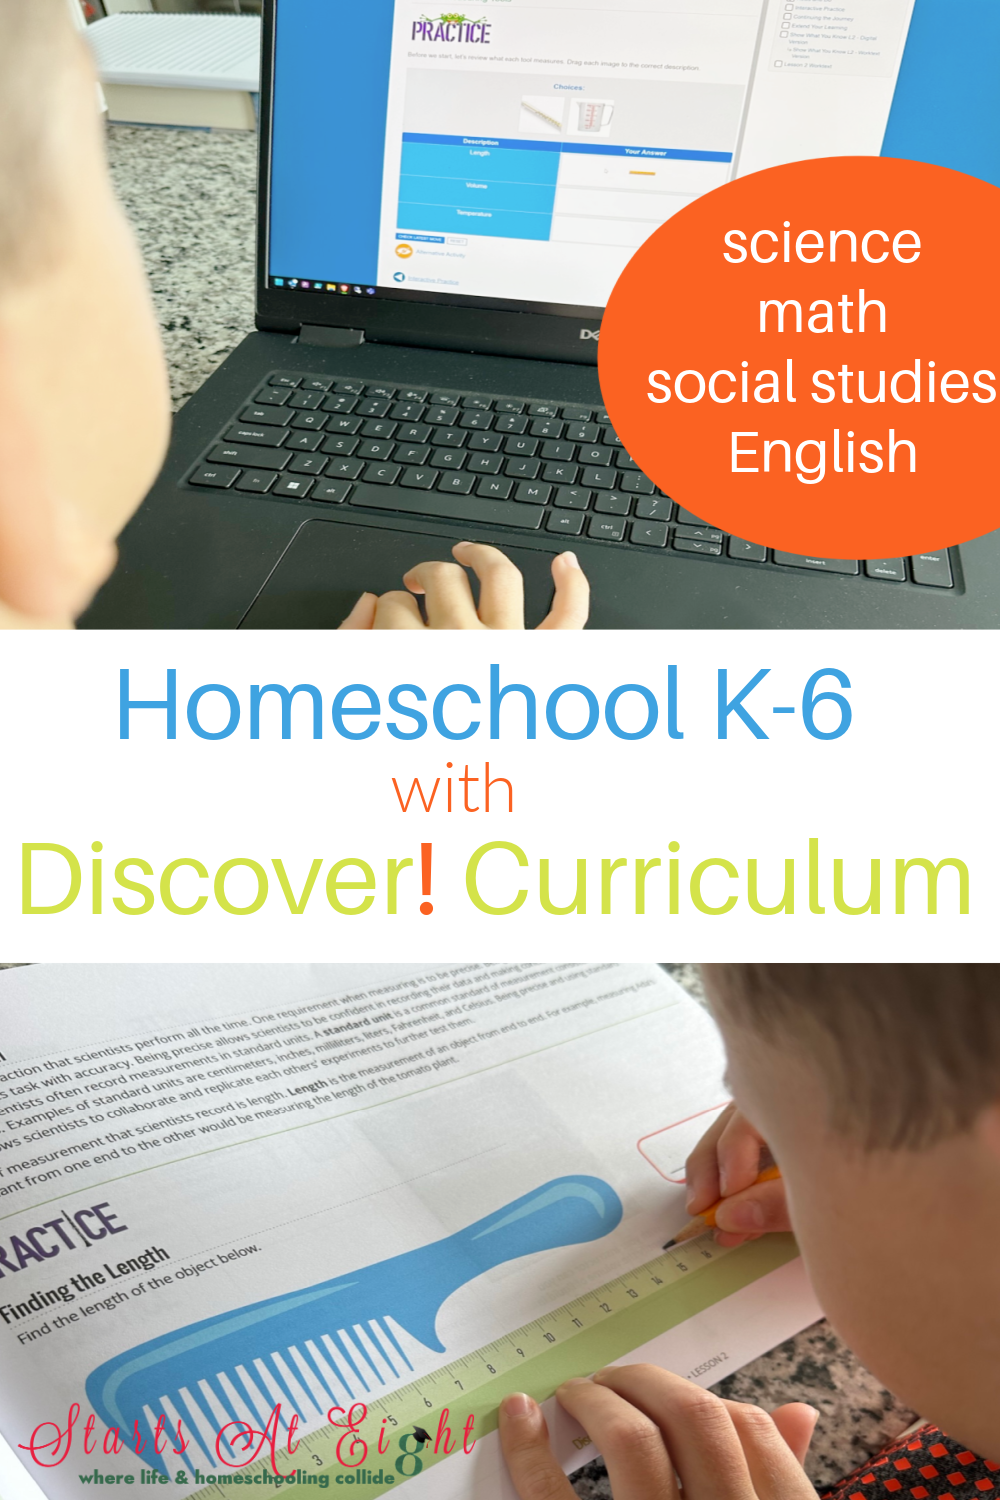 Homeschool K-6 with Discover! Curriculum combines print & digital resources to bring a complete learning experience for the elementary years.